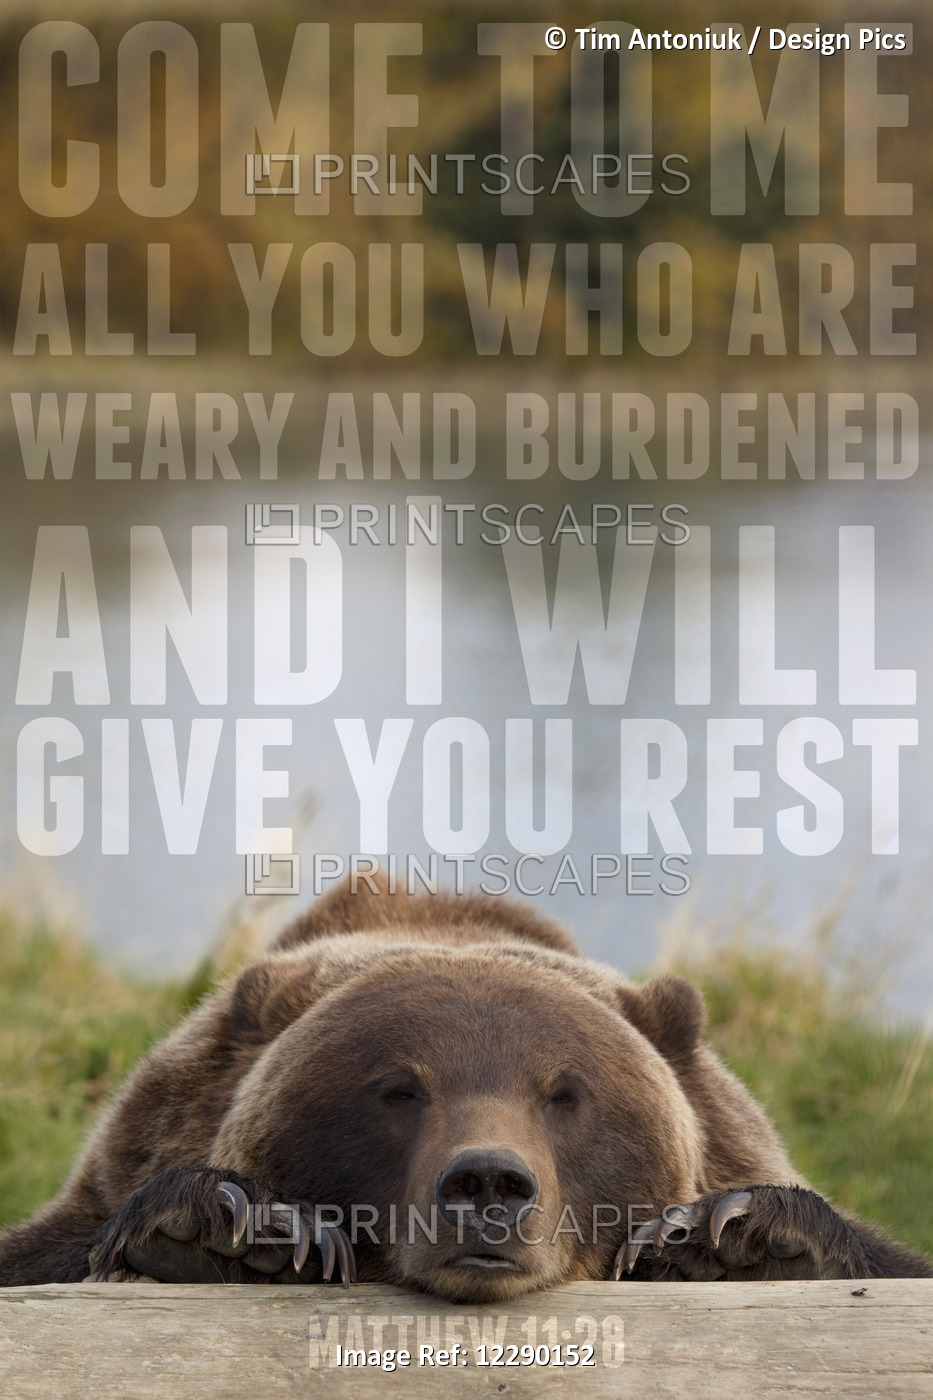 Image Of A Bear Resting It's Head On A Log With A Scripture From Matthew 11:28